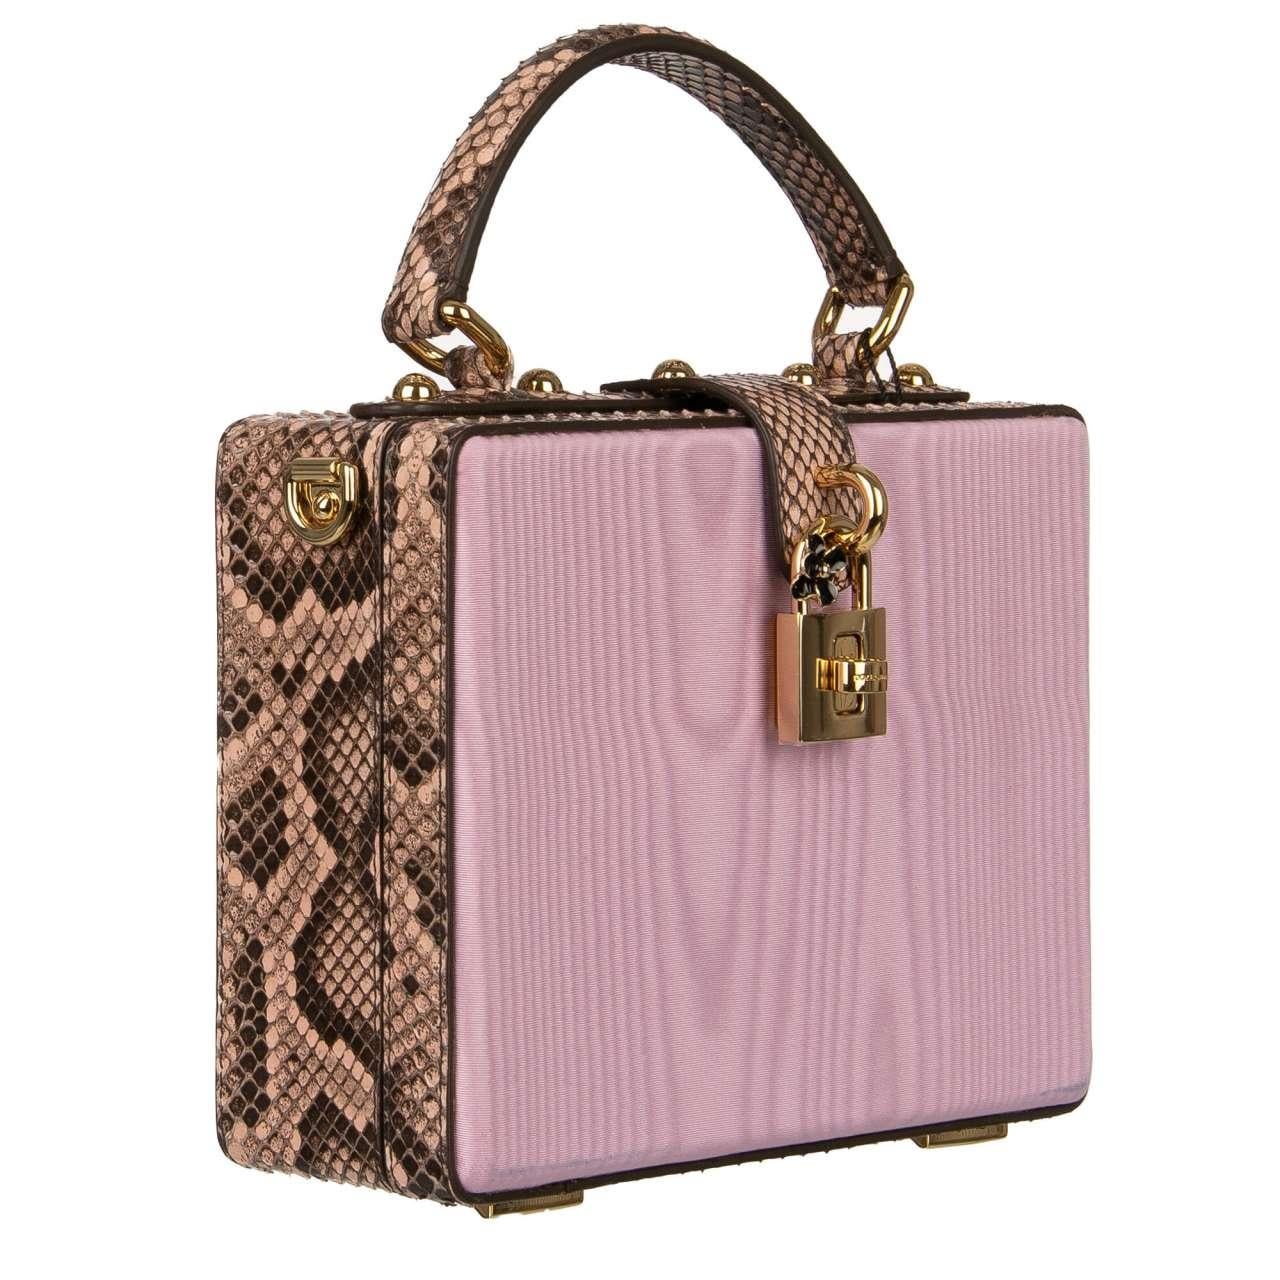 Dolce & Gabbana - Unique Snakeskin and Moire Clutch Bag DOLCE BOX Pink In Excellent Condition For Sale In Erkrath, DE